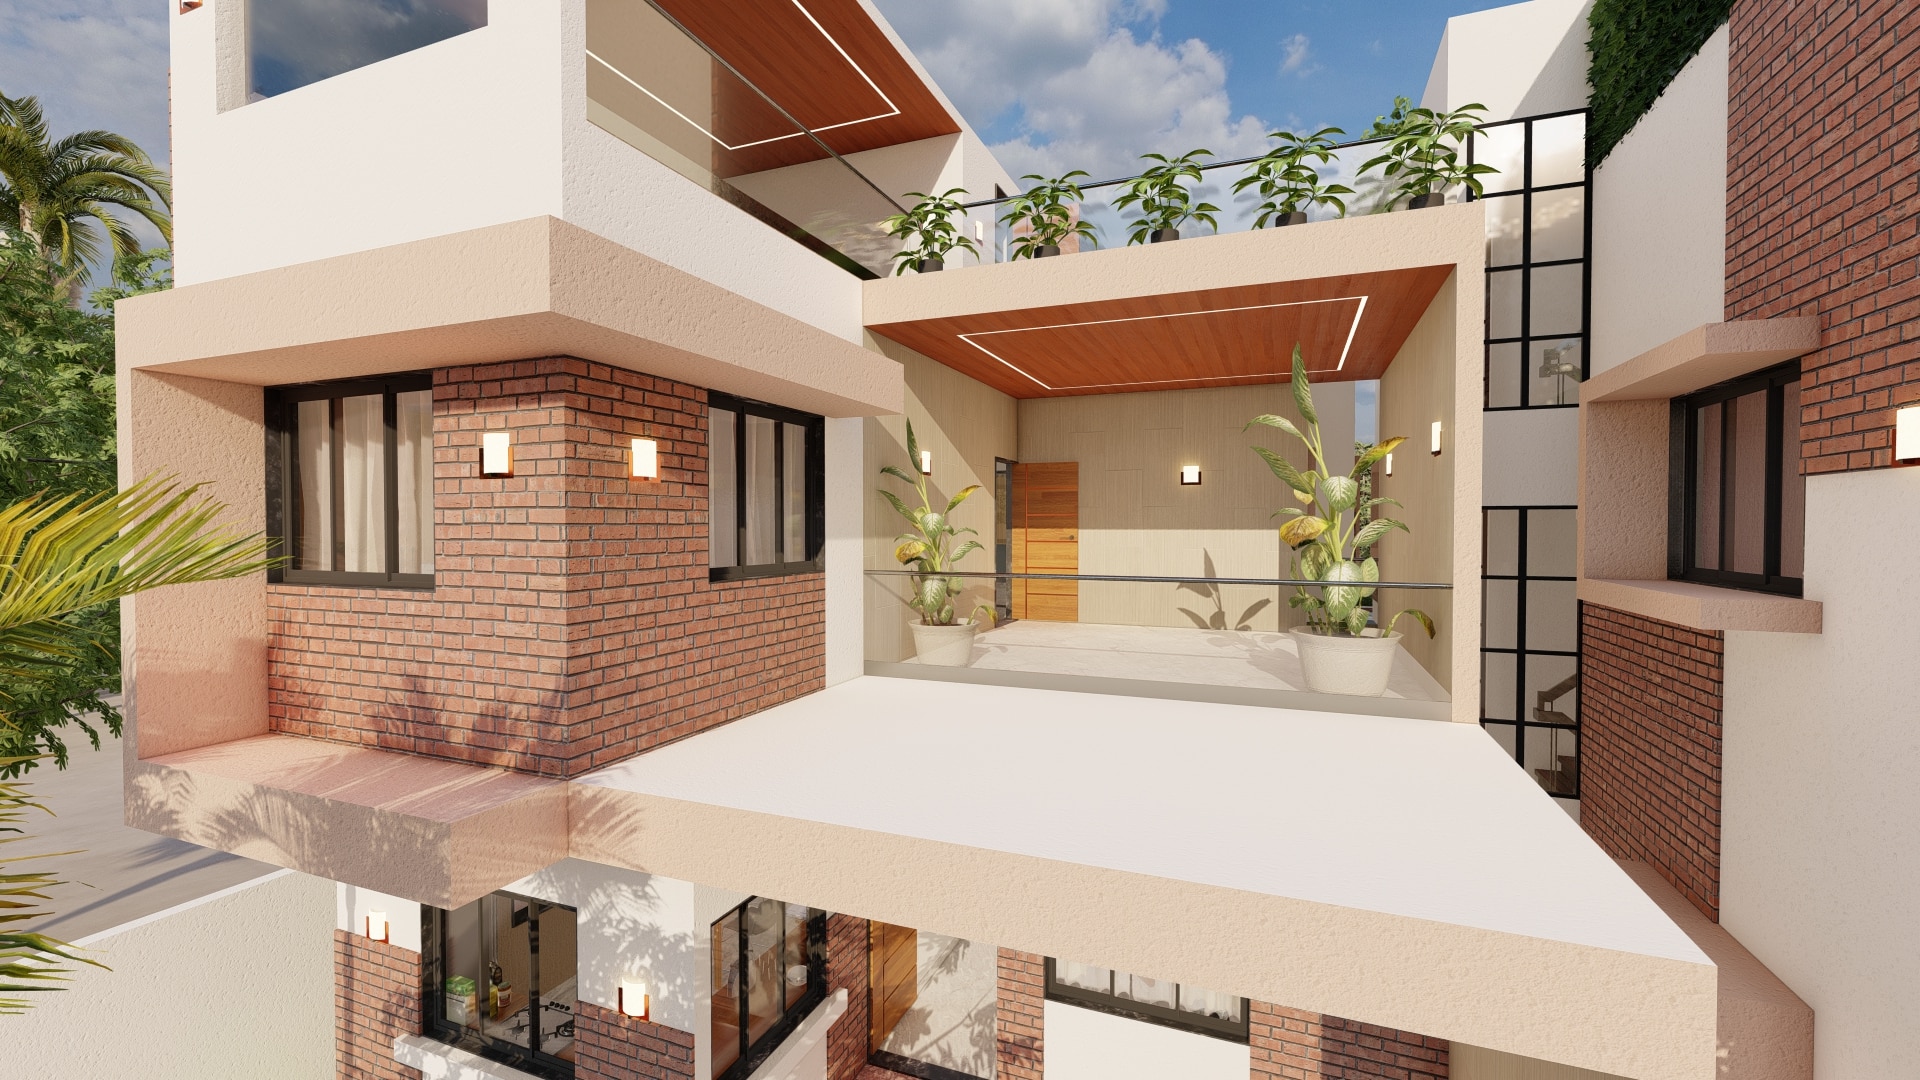 covered terrace deck of best villa home layout design by urban terrace east facing 30x60 sq ft